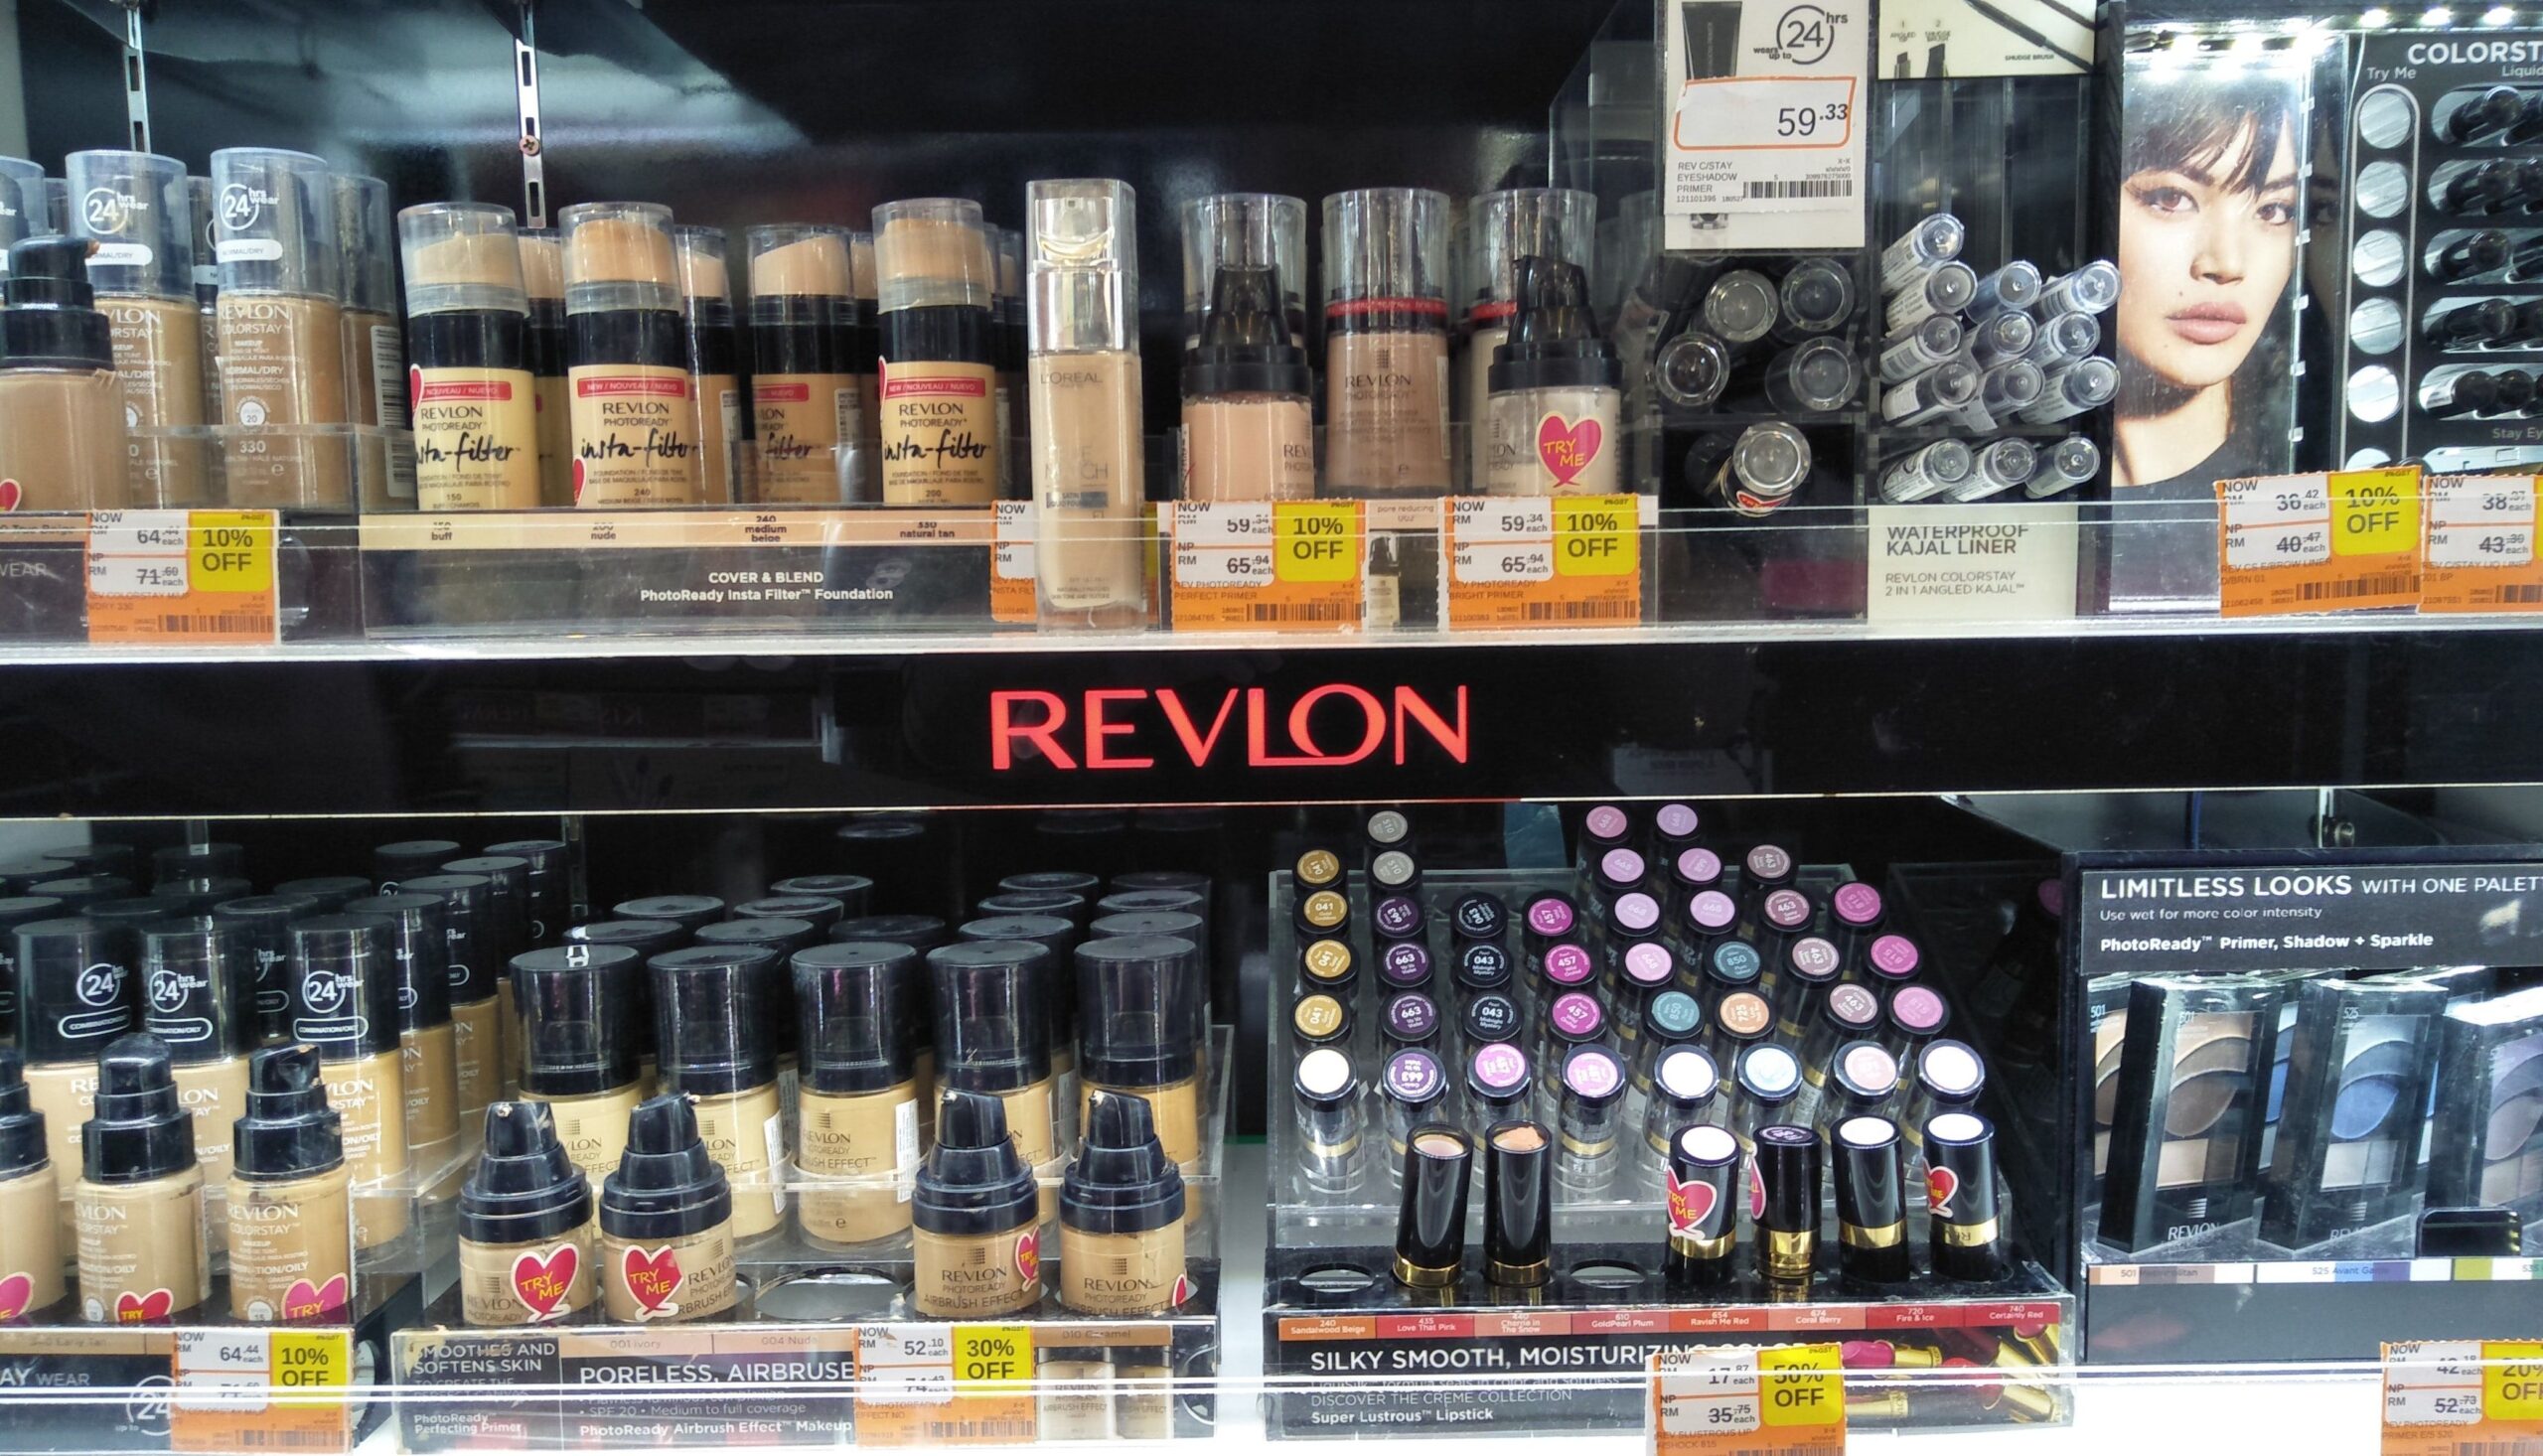 Revlon Cleared to Exit Bankruptcy With $2.7 Billion on Debt Reduction Deal